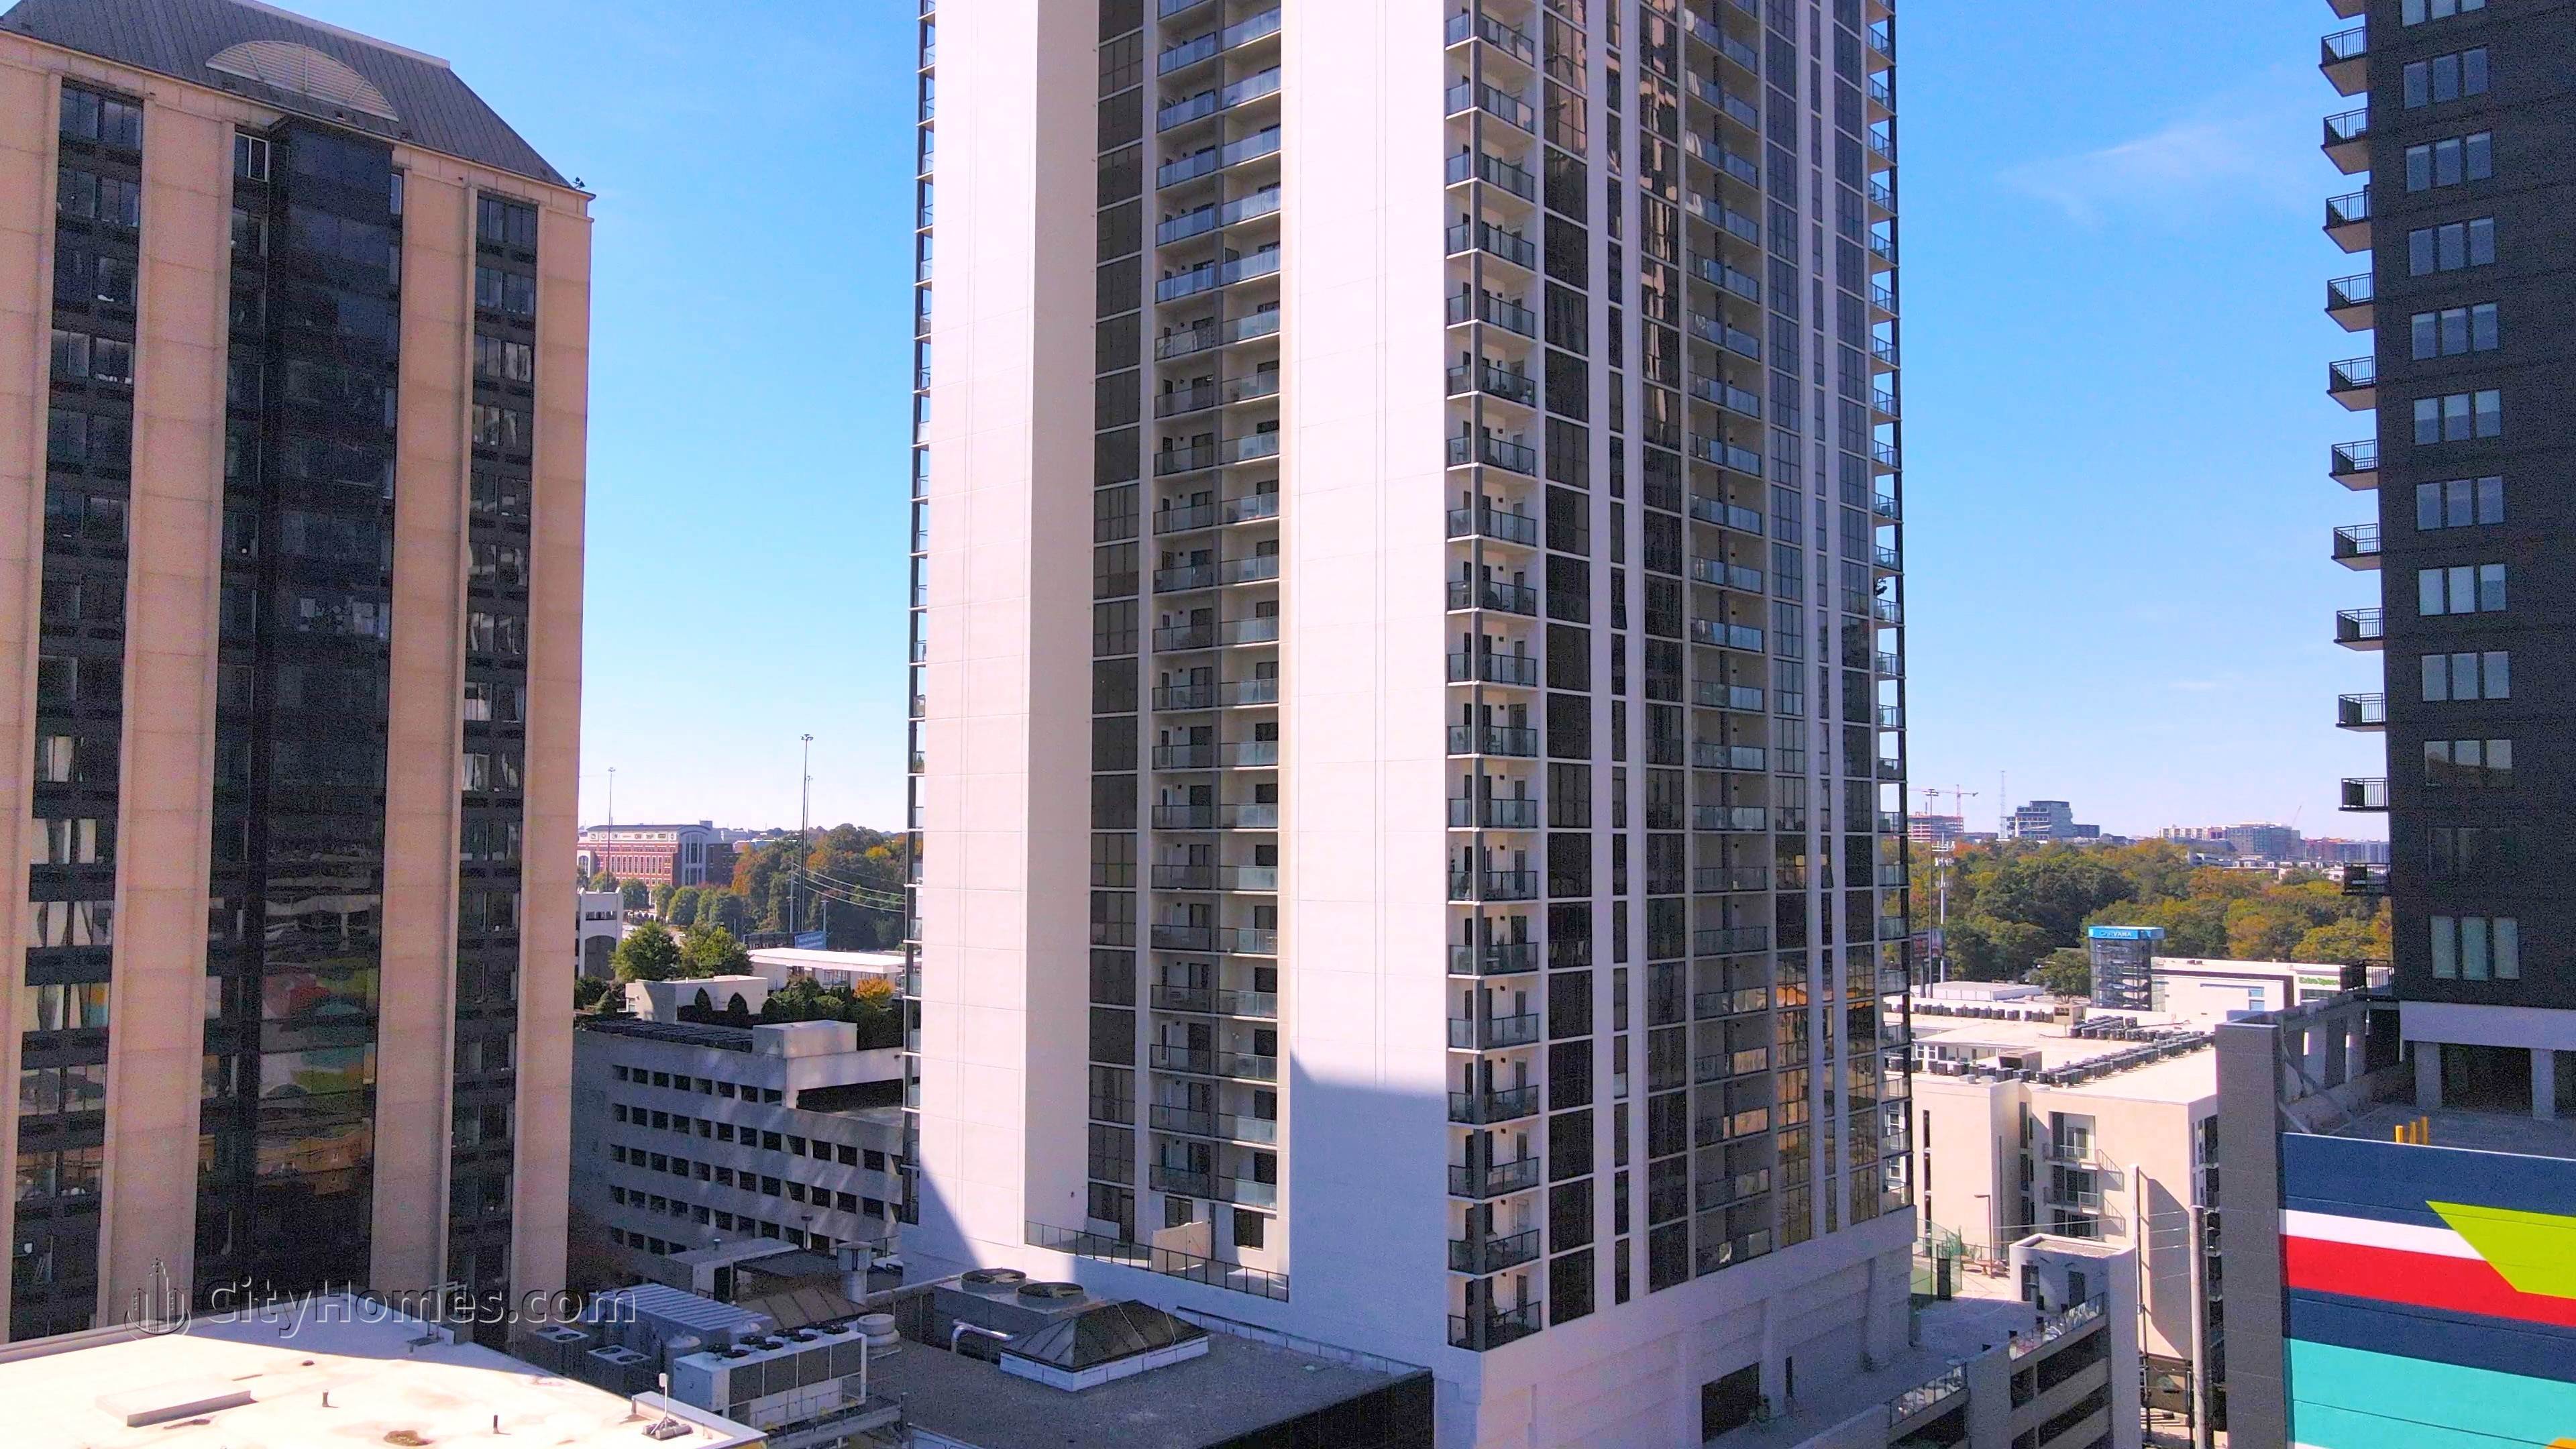 2. 1280 West Condos building at 1280 West Peachtree St NW, Greater Midtown, Atlanta, GA 30309